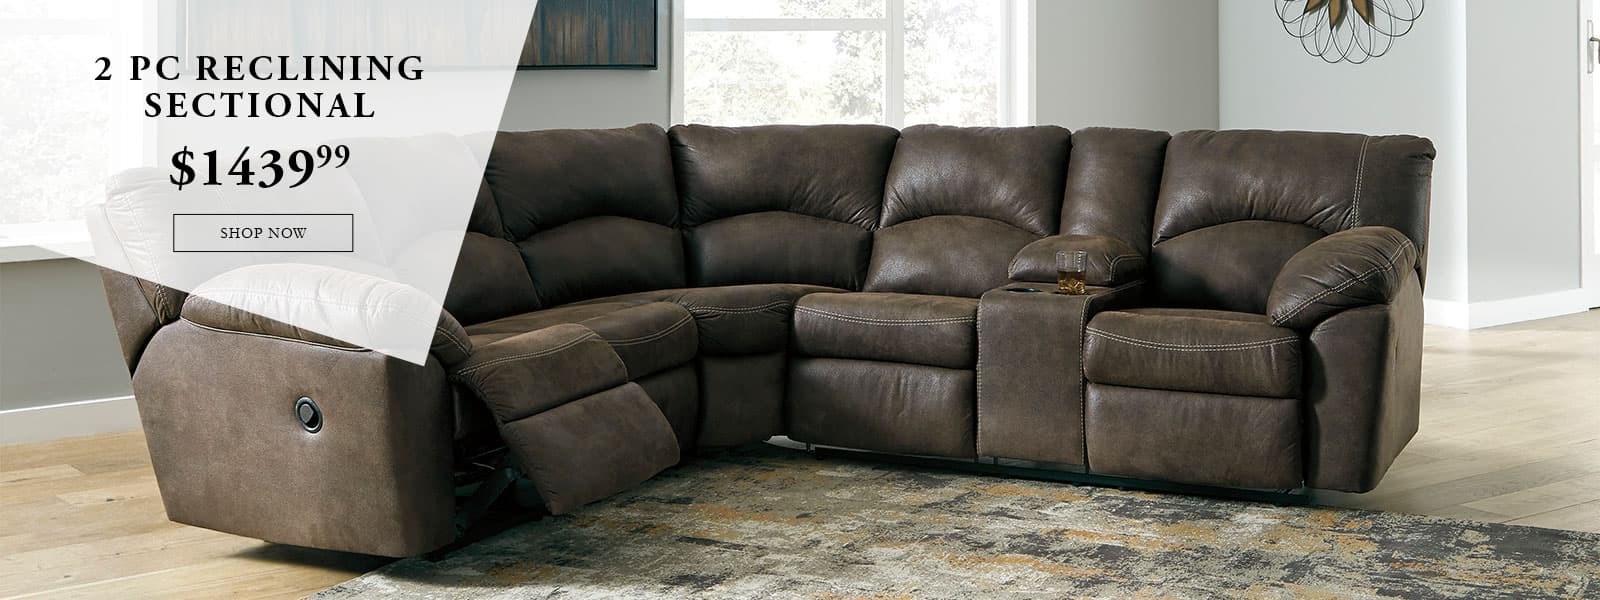 2 pc reclining sectional $1439.99